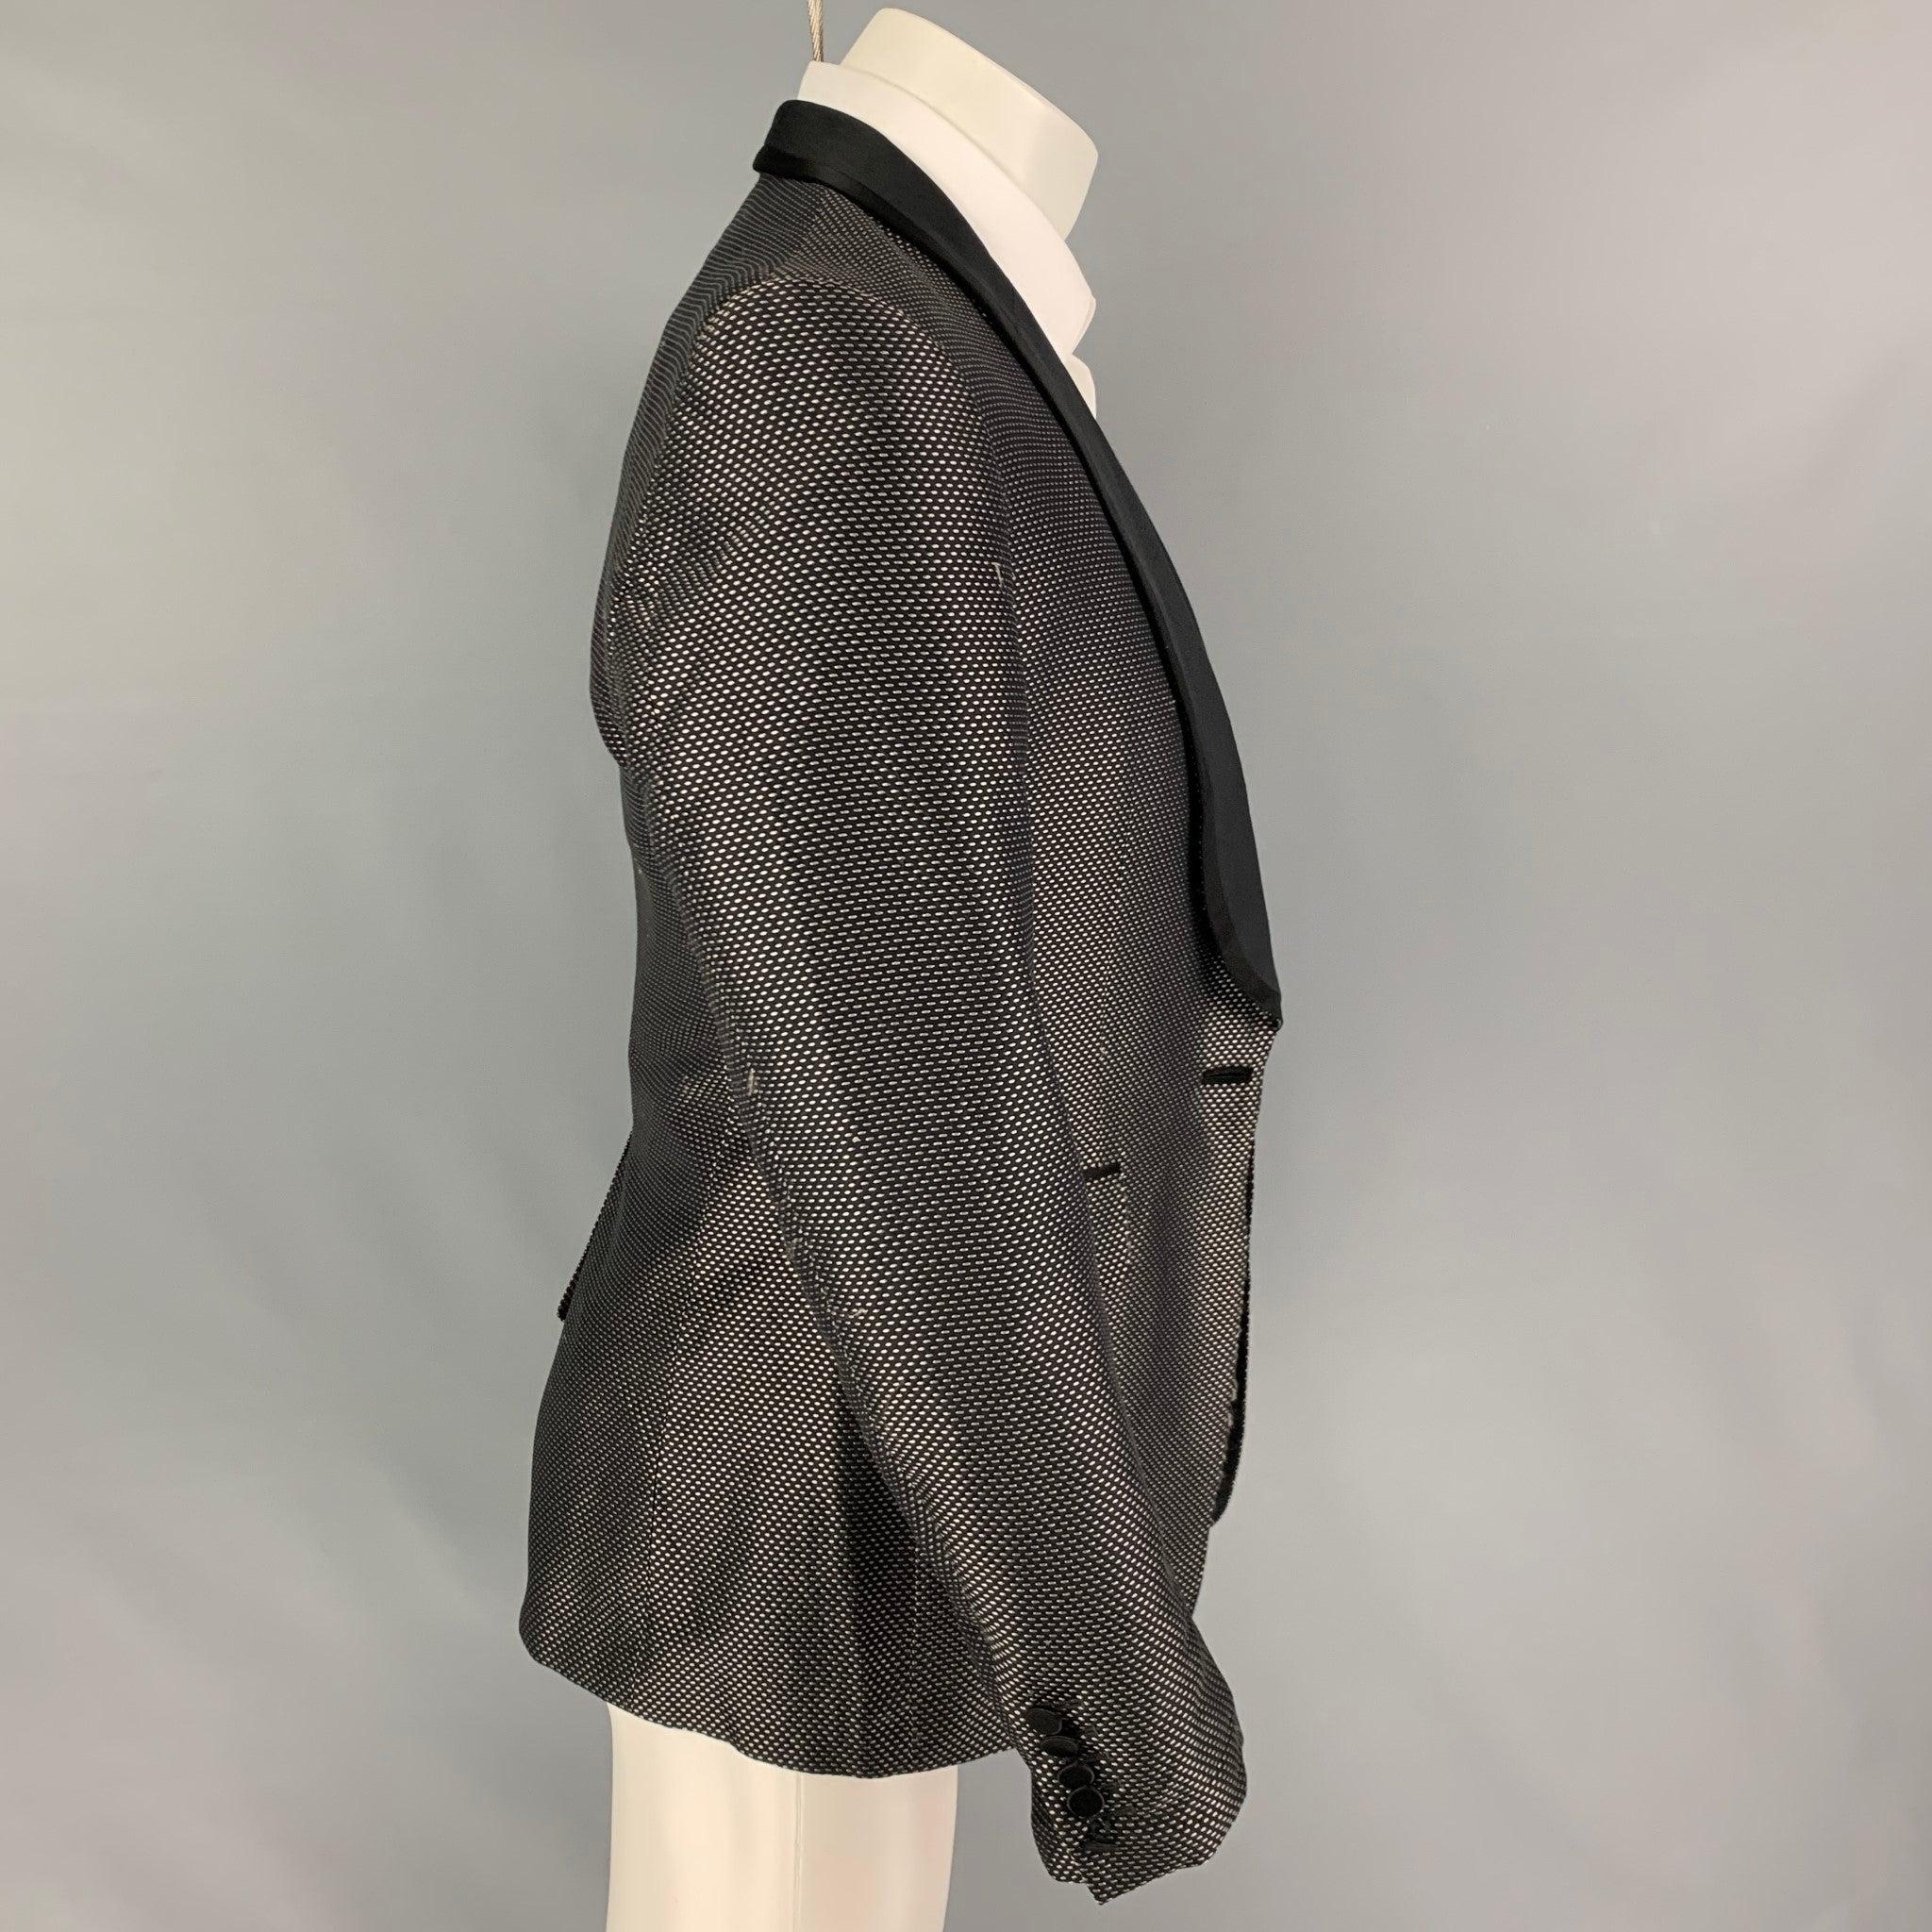 GUCCI
 sport coat comes in a grey & black textured rayon blend with a full liner featuring a shawl collar, flap pockets, single back vent, and a single button closure.Good Pre-Owned Condition. Missing button. As-is.  
 

 Marked:  50 R  
 

